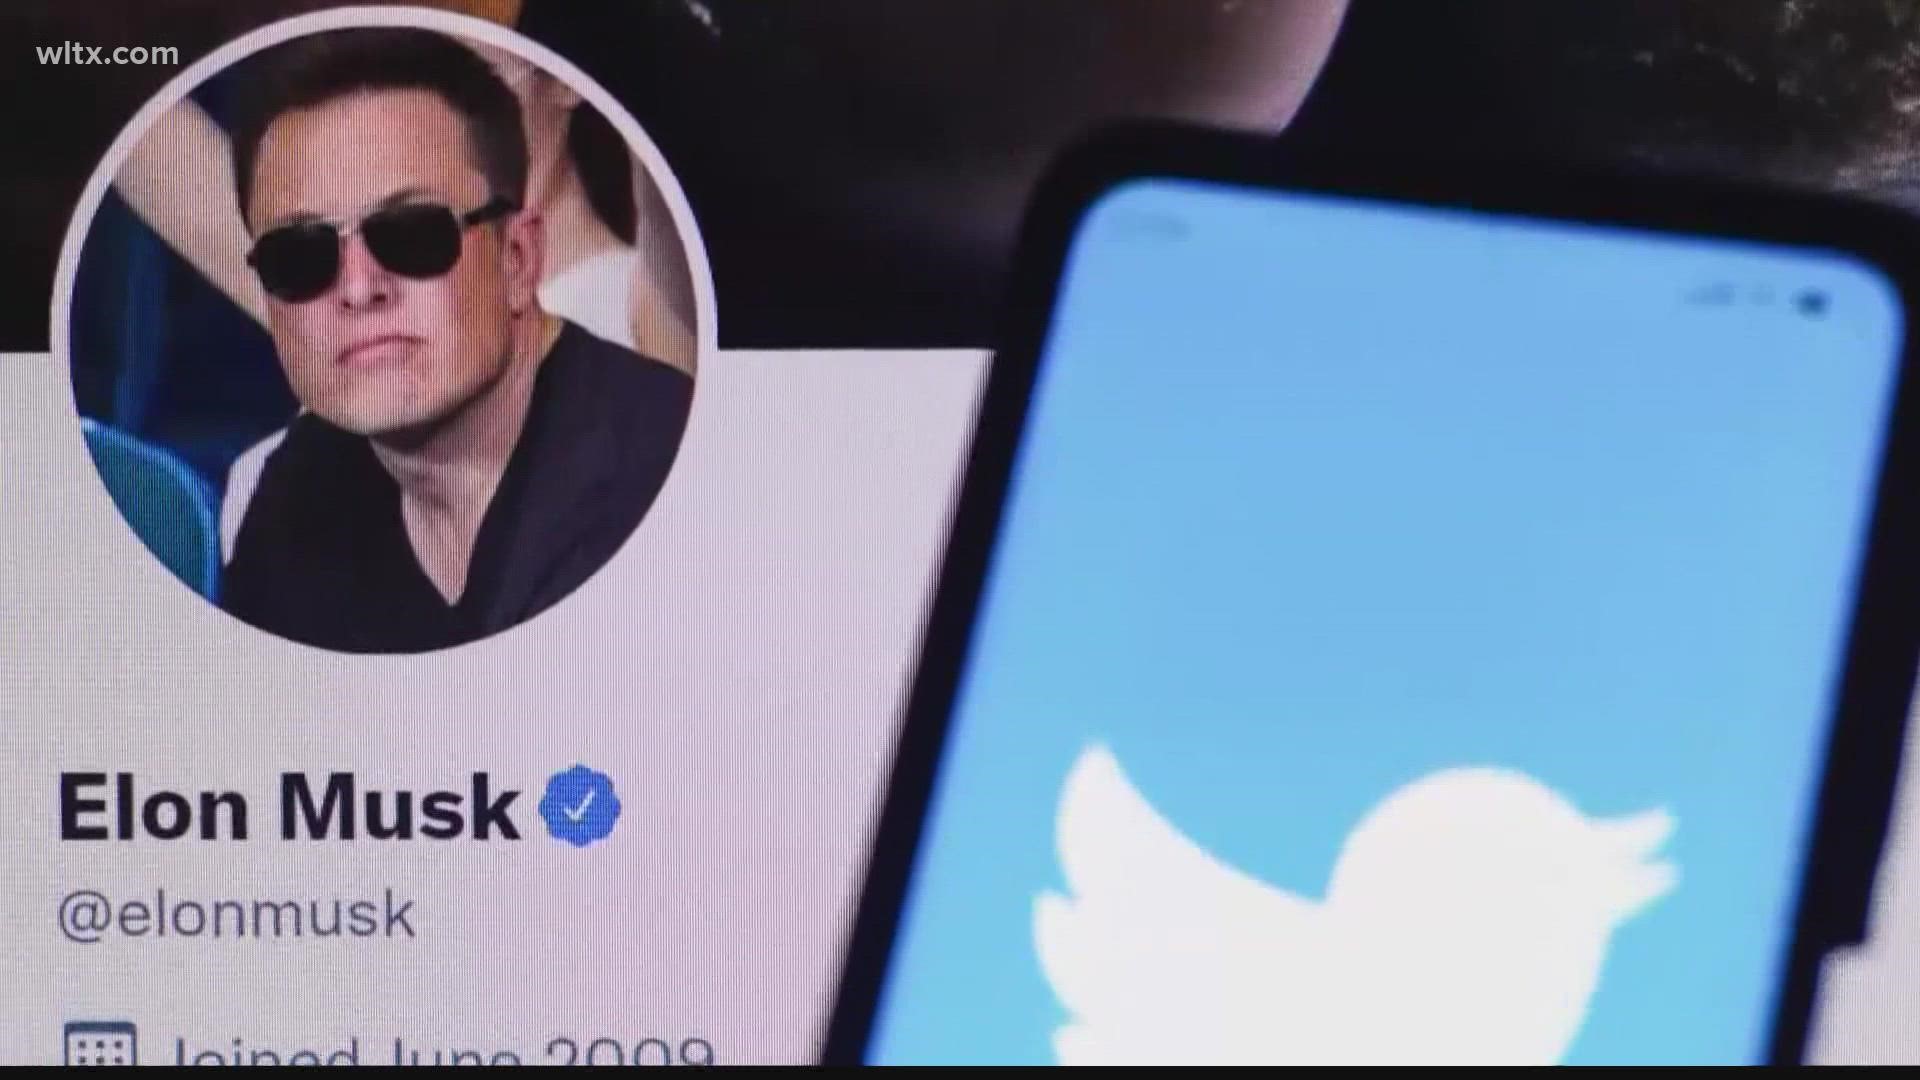 On twitter today, the billionaire said he's doubtful that the number of inauthentic accounts presented by twitter is as low as the company suggests.